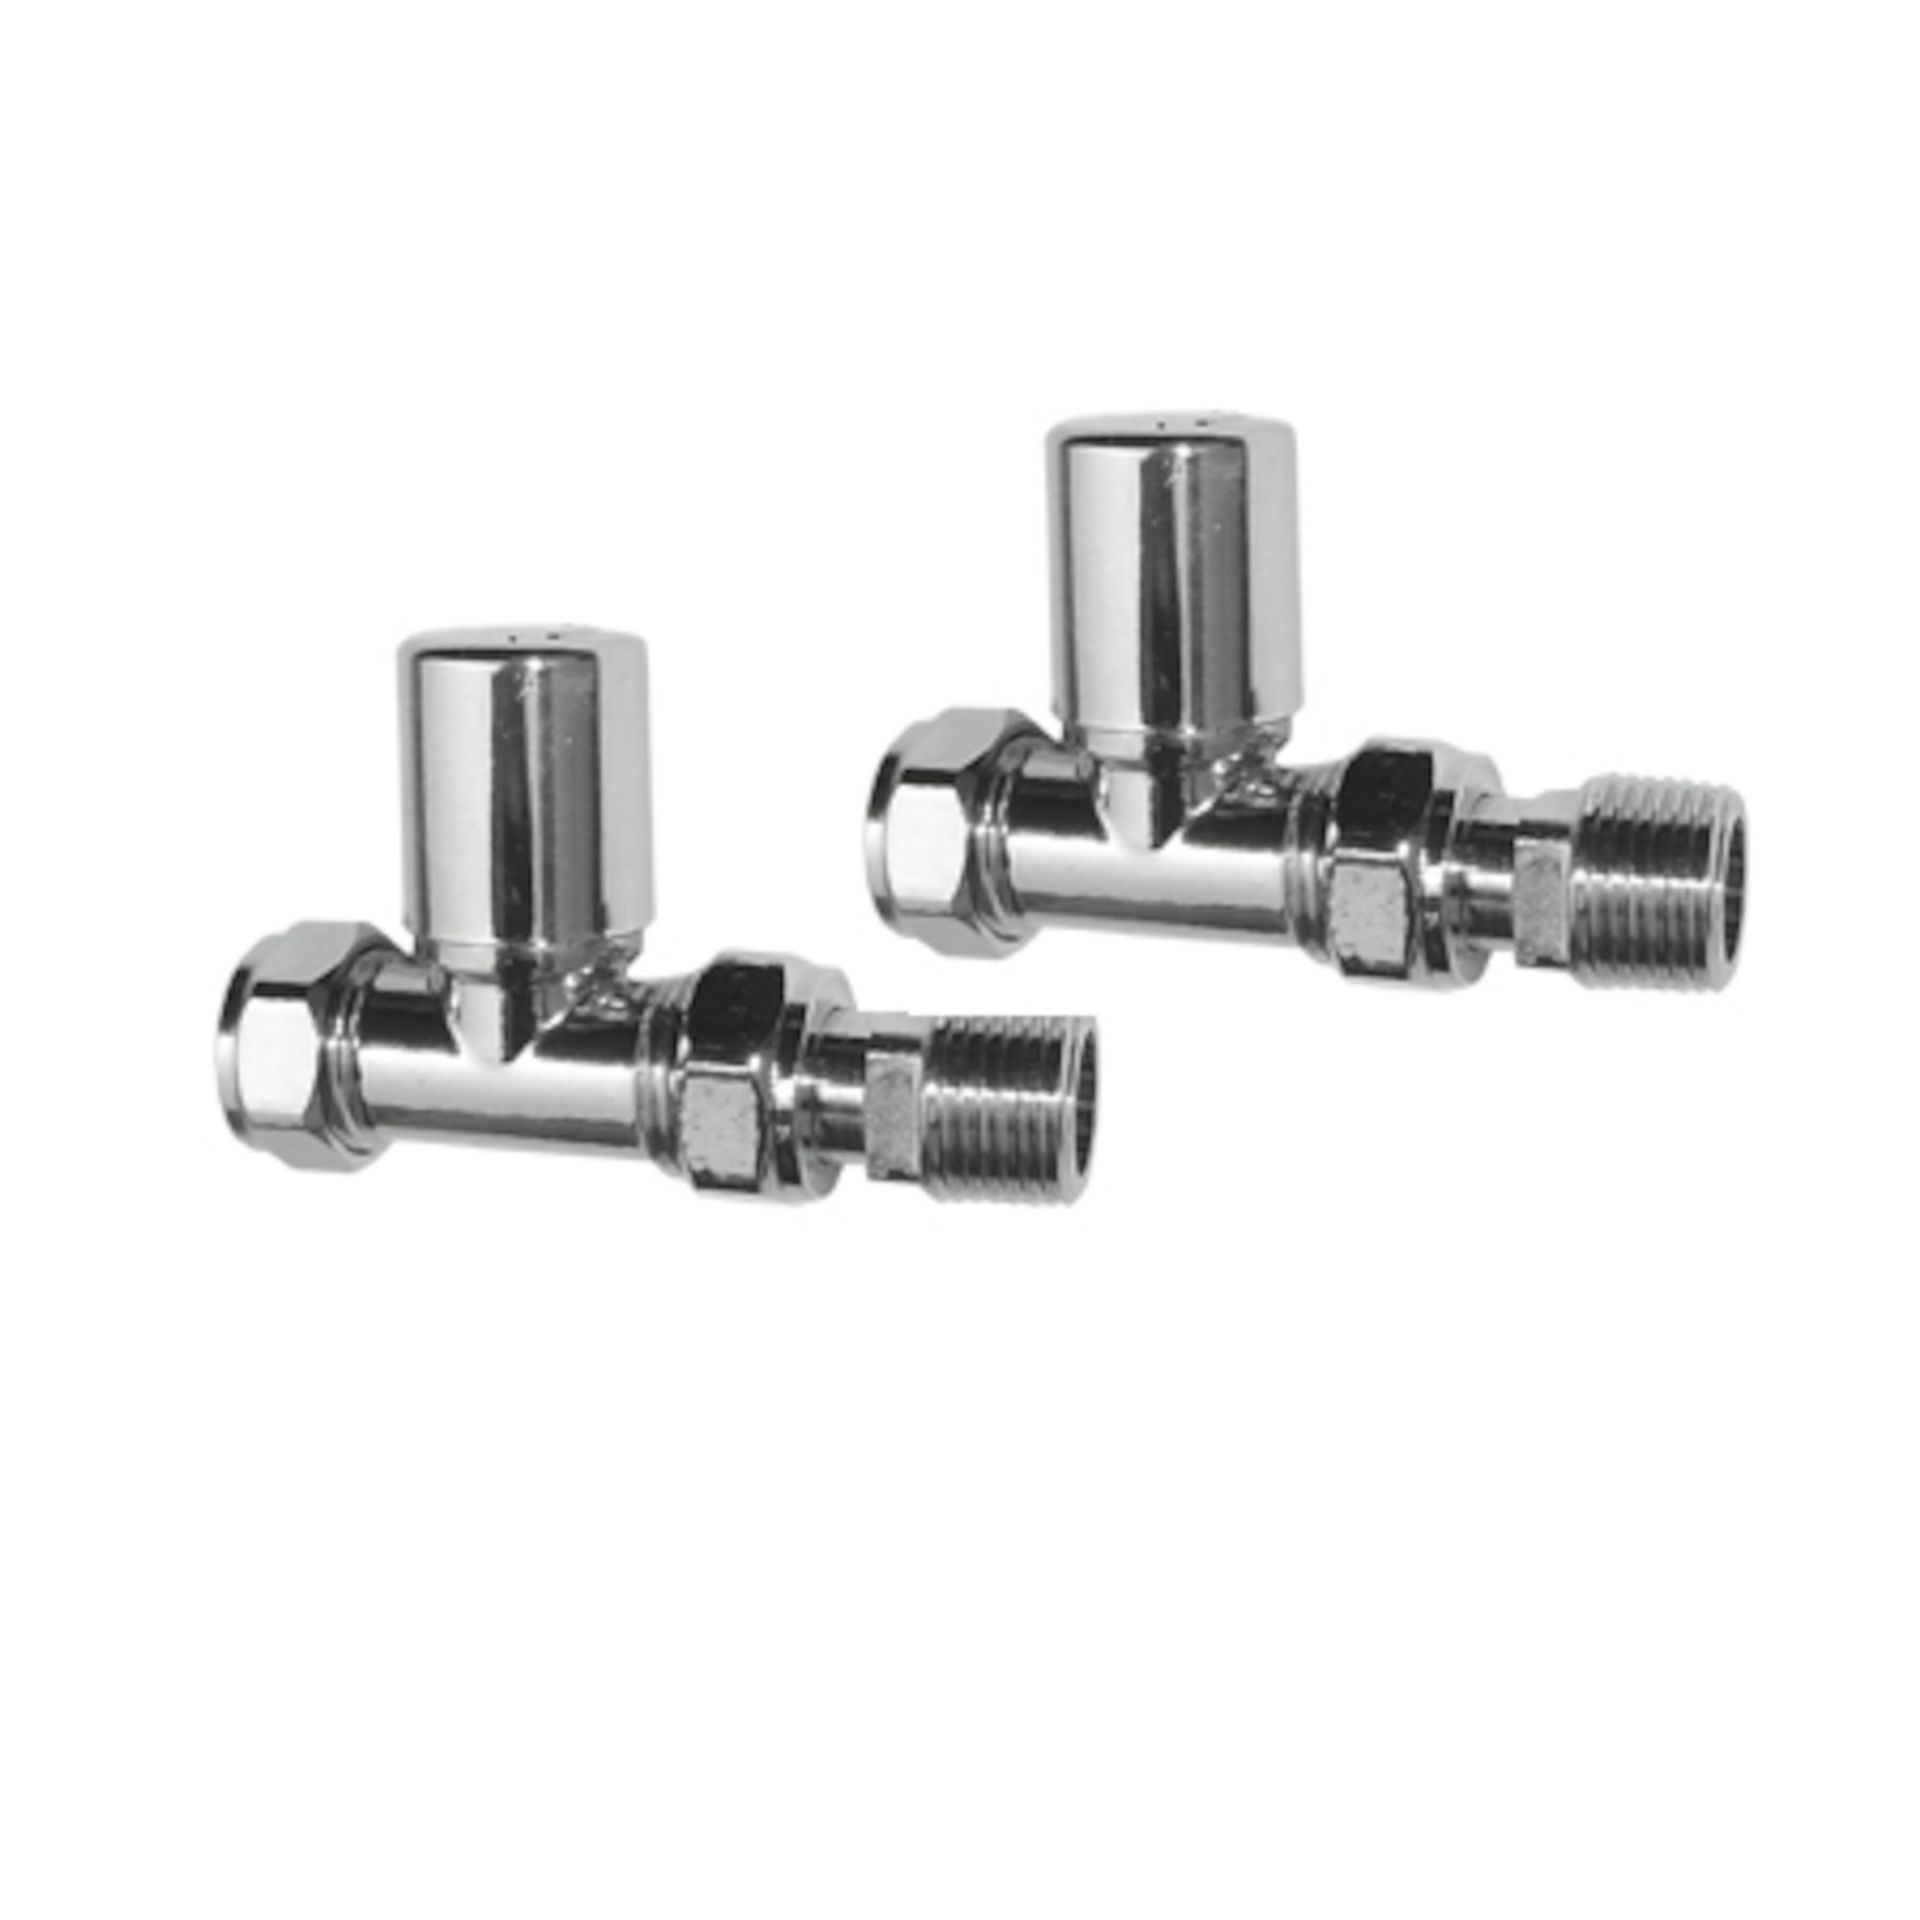 (LX22) Standard 15mm Connection Straight Chrome Radiator Valves Chrome Plated Solid Brass Straight - Image 2 of 3